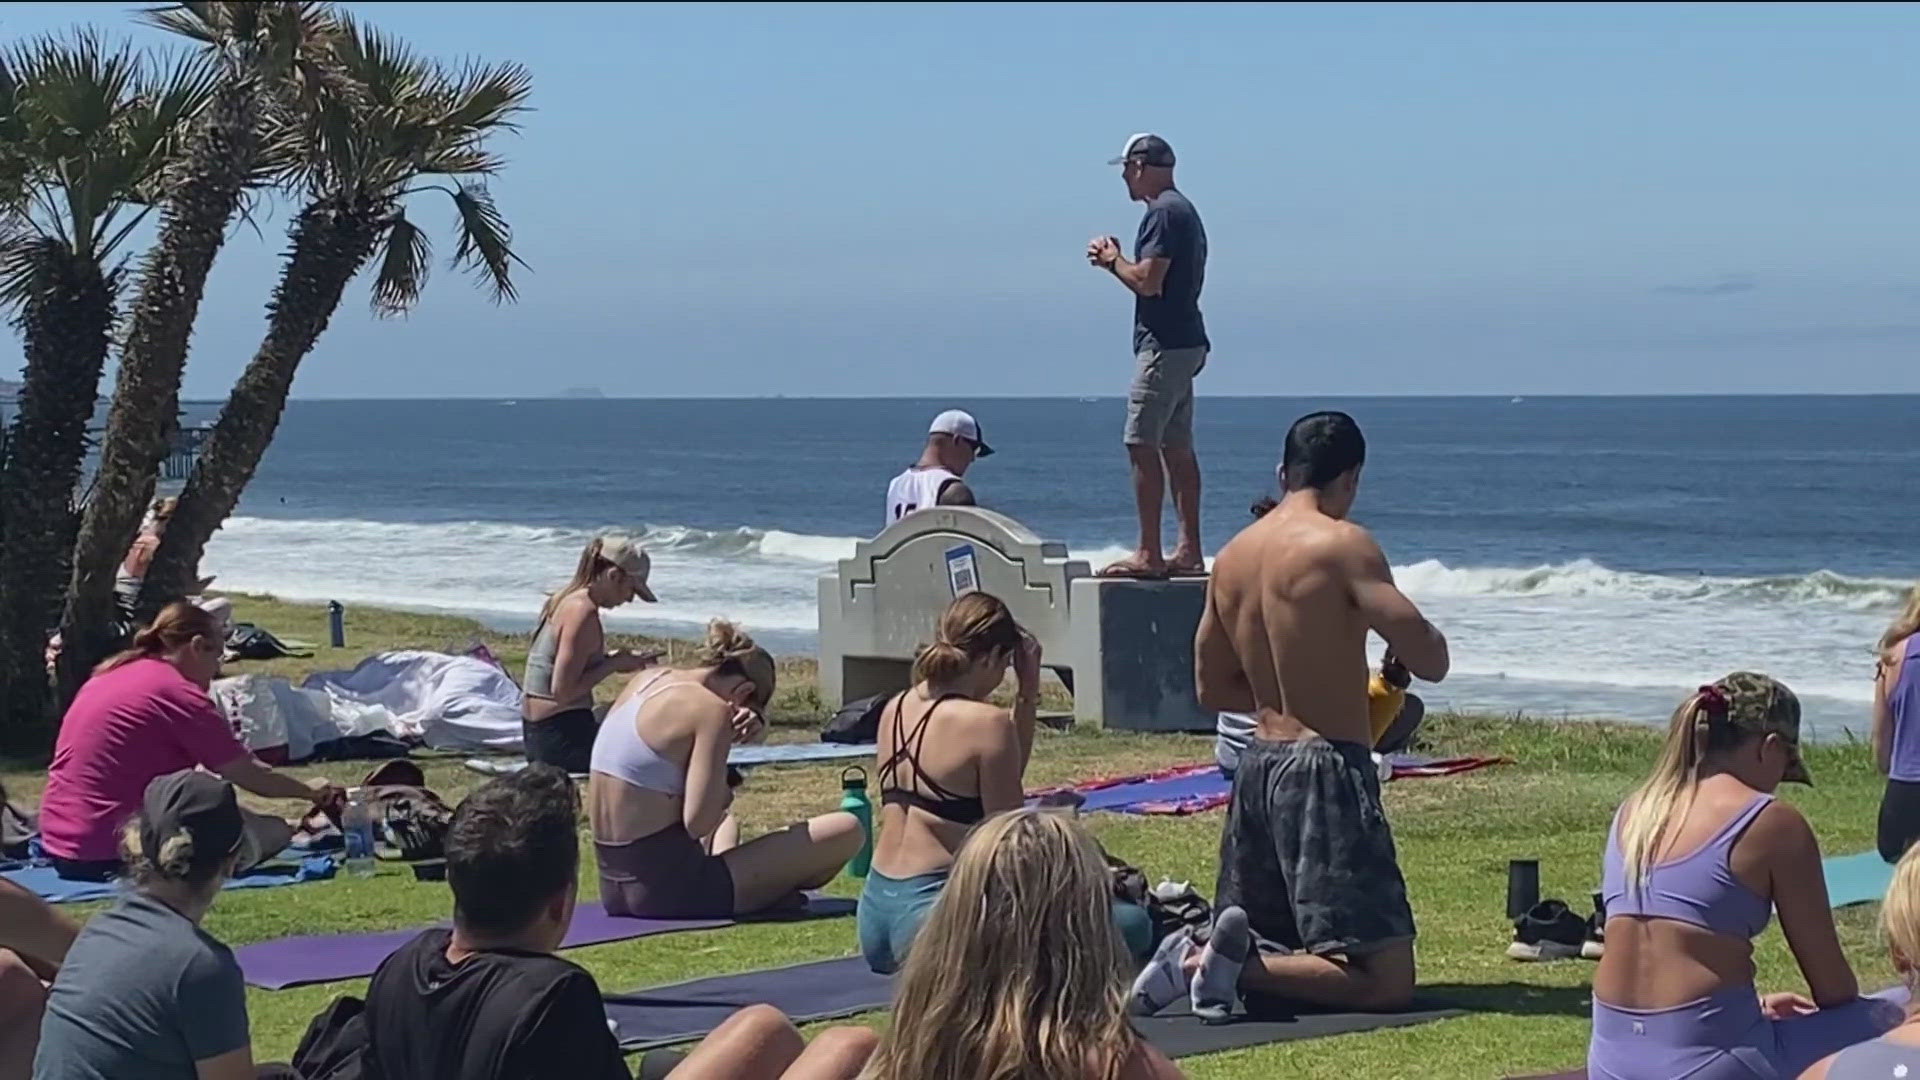 Steve Hubbard has offered free oceanfront yoga classes for 17 years in Pacific Beach but was ticketed Saturday for holding a public event without a permit.